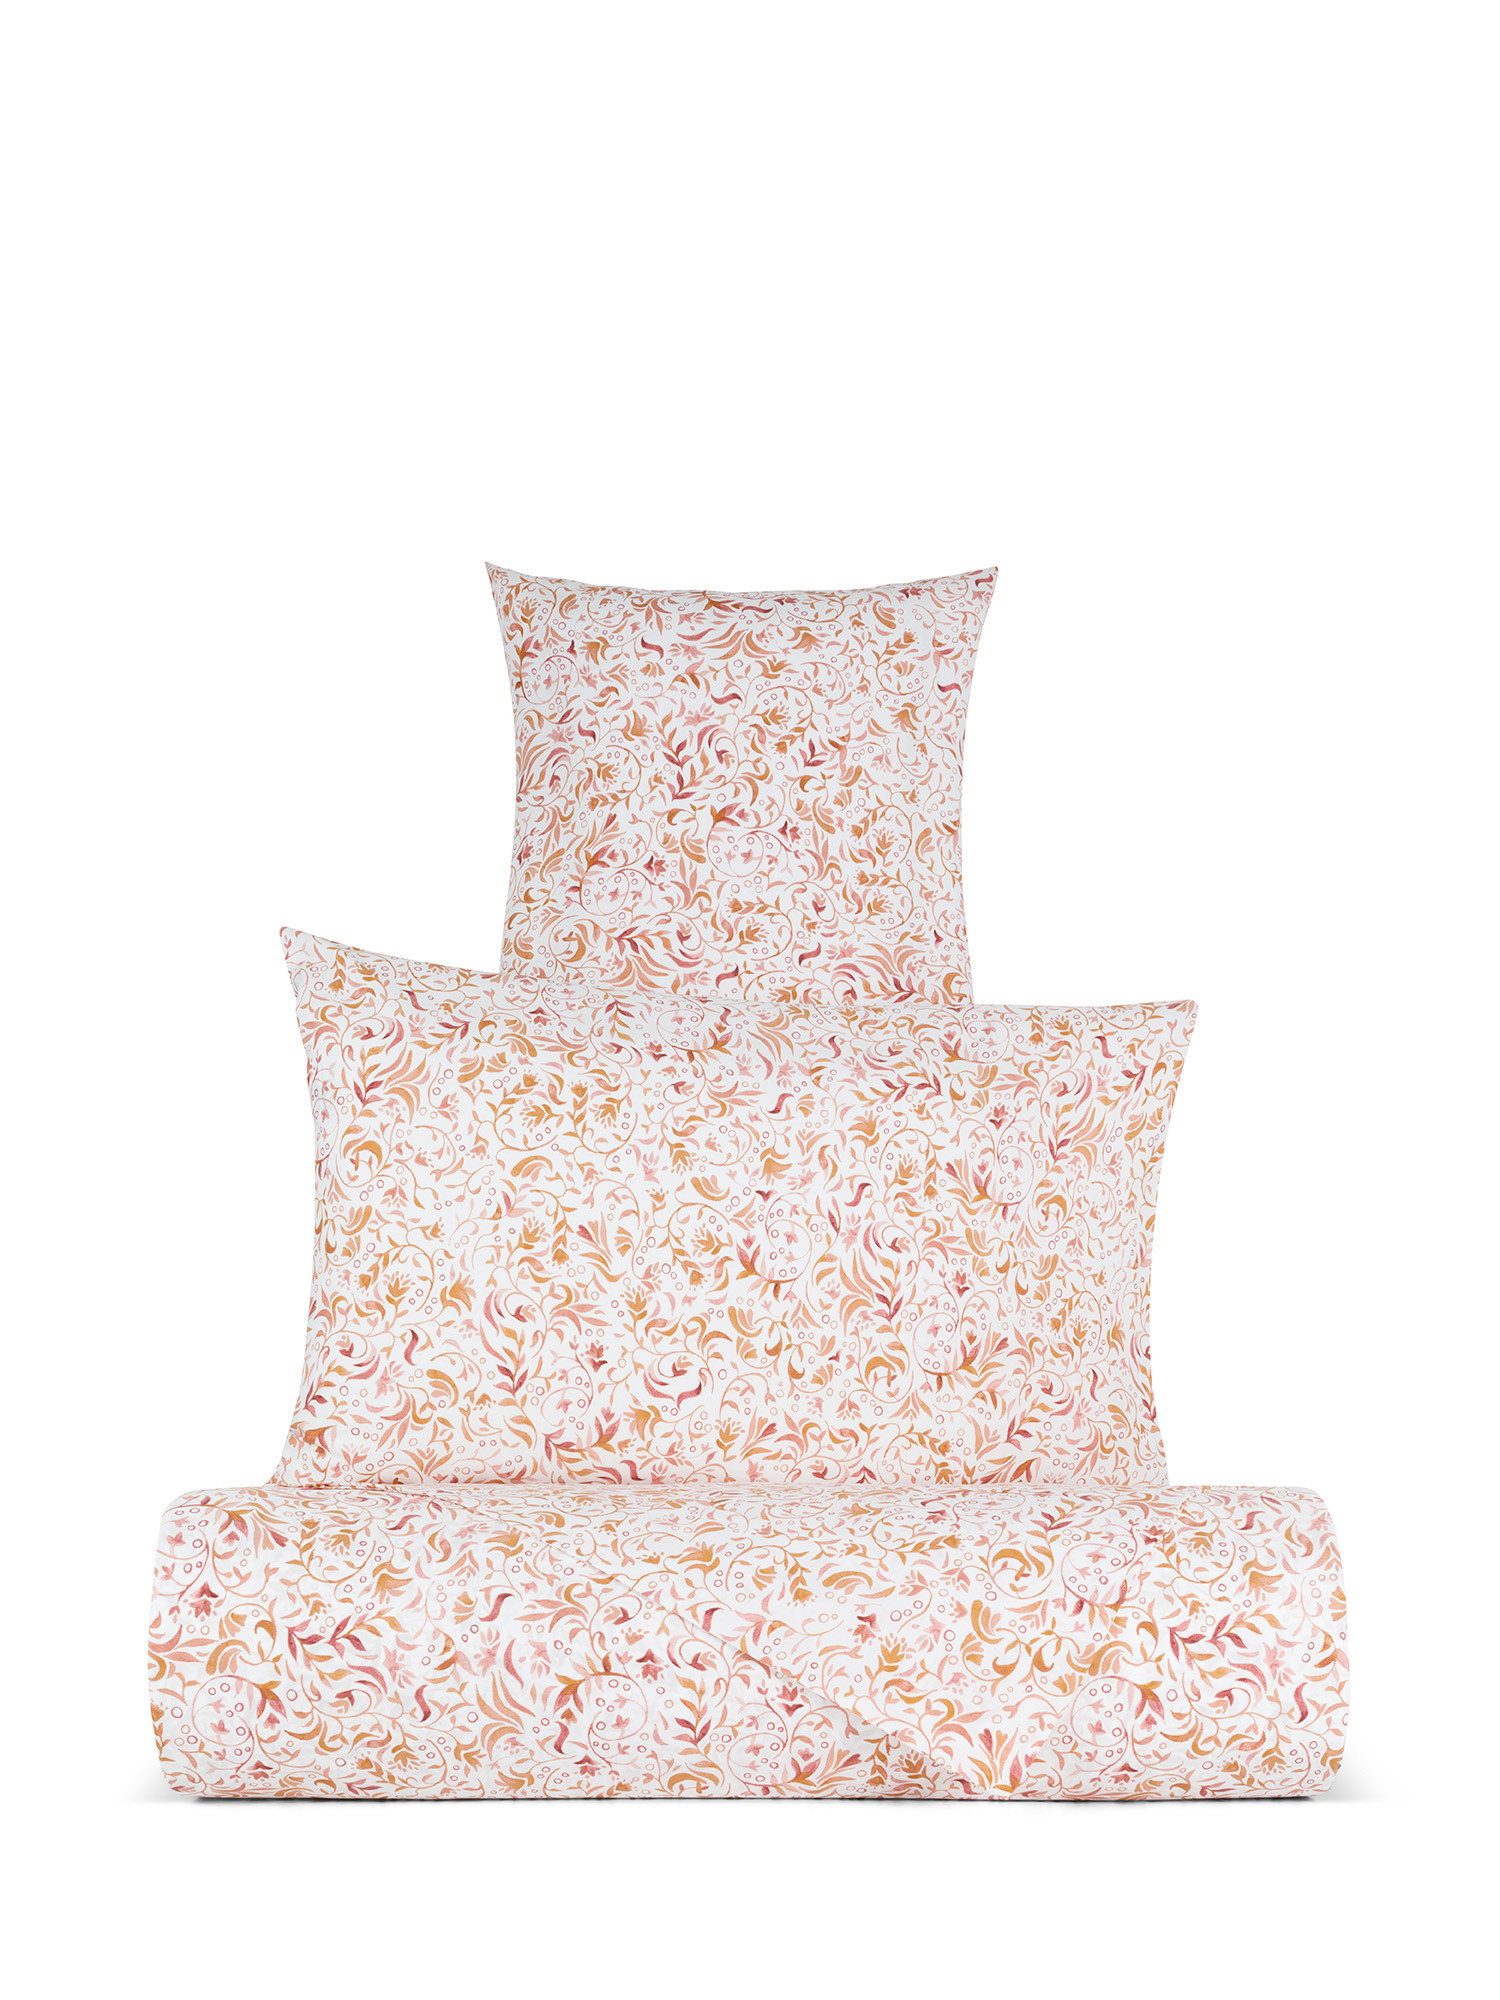 Little flowers patterned cotton percale duvet cover set, Pink, large image number 0